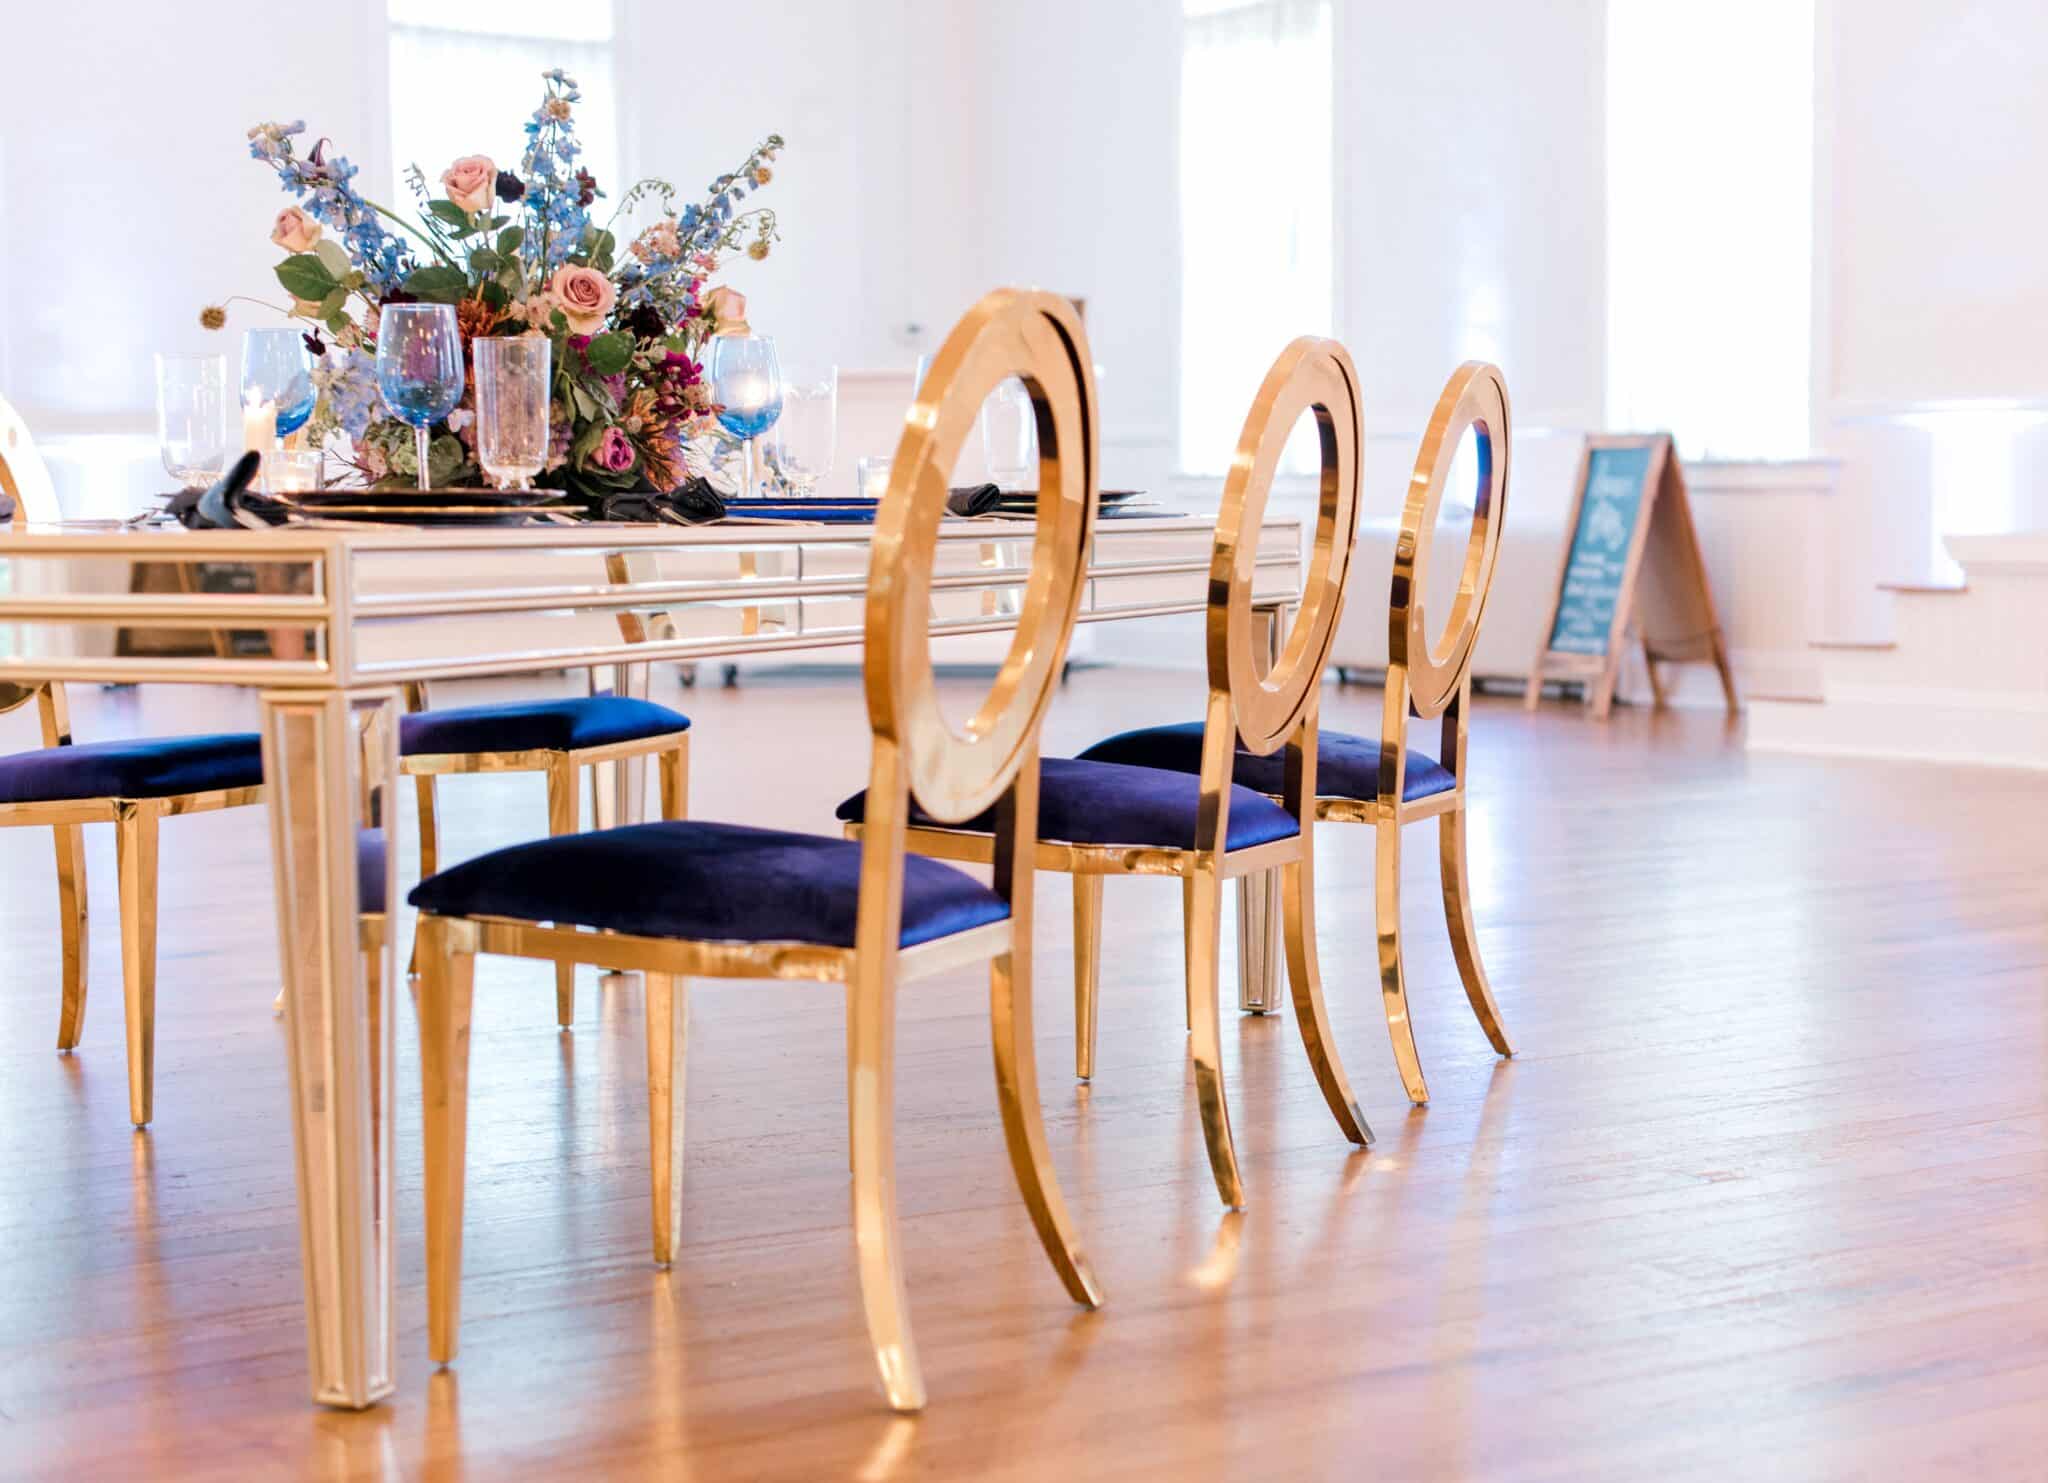 golden chair with blue padded eat and golden table with decor for a wedding styled shoot on top with hard wood floors